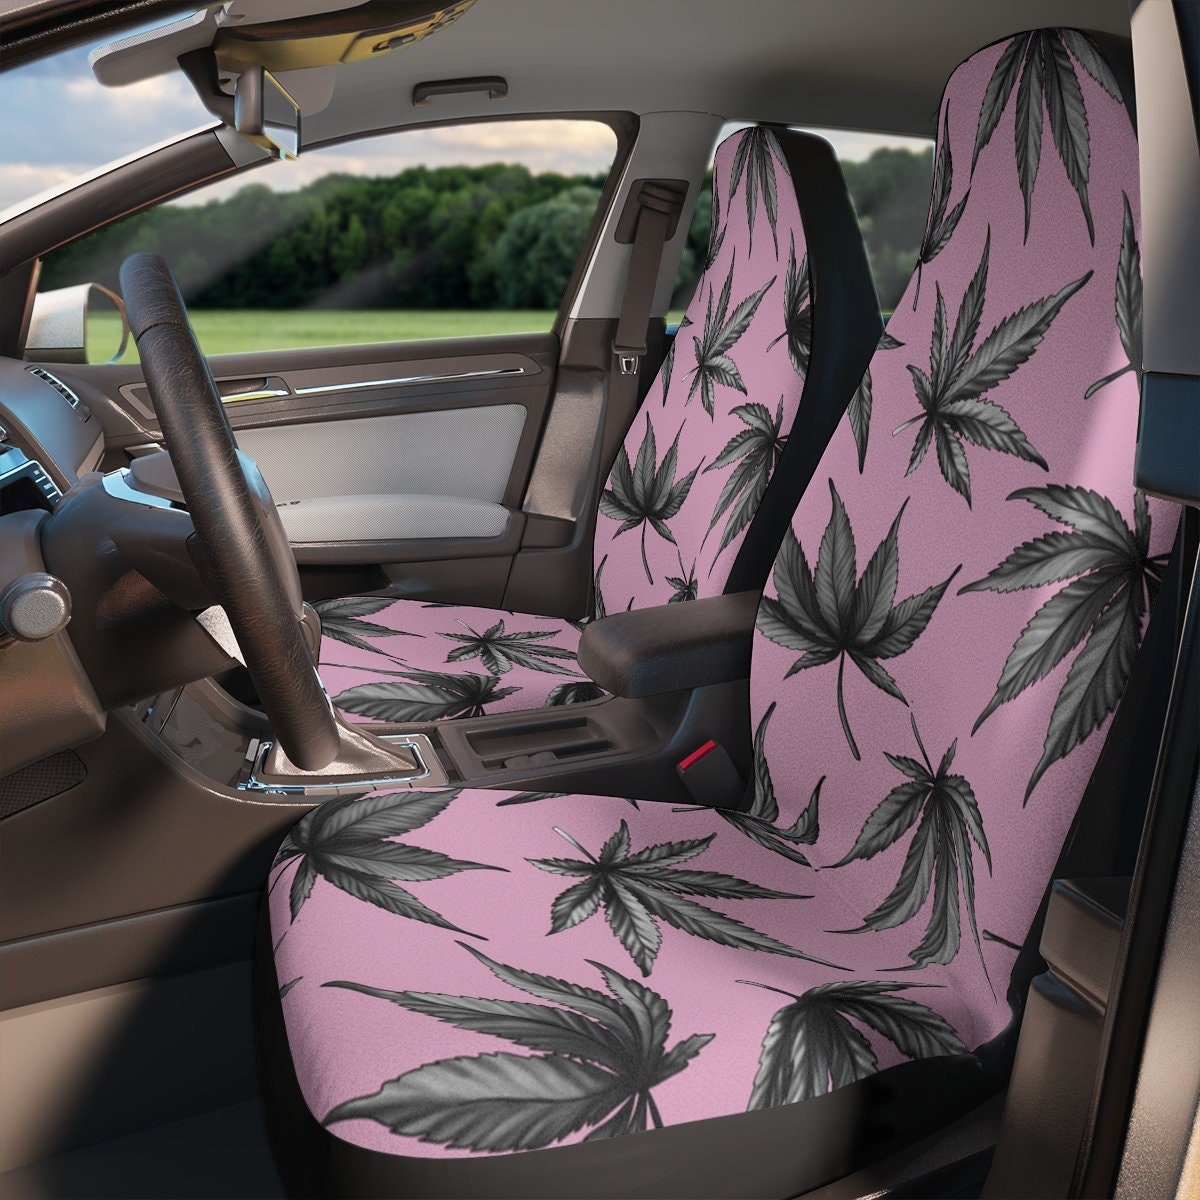 Car Seat Covers, Weed Leaf Car Accessories for Women, Pink Hippie Car Decor, Universal Chair Cover, Stoner Vehicle Seat Cover